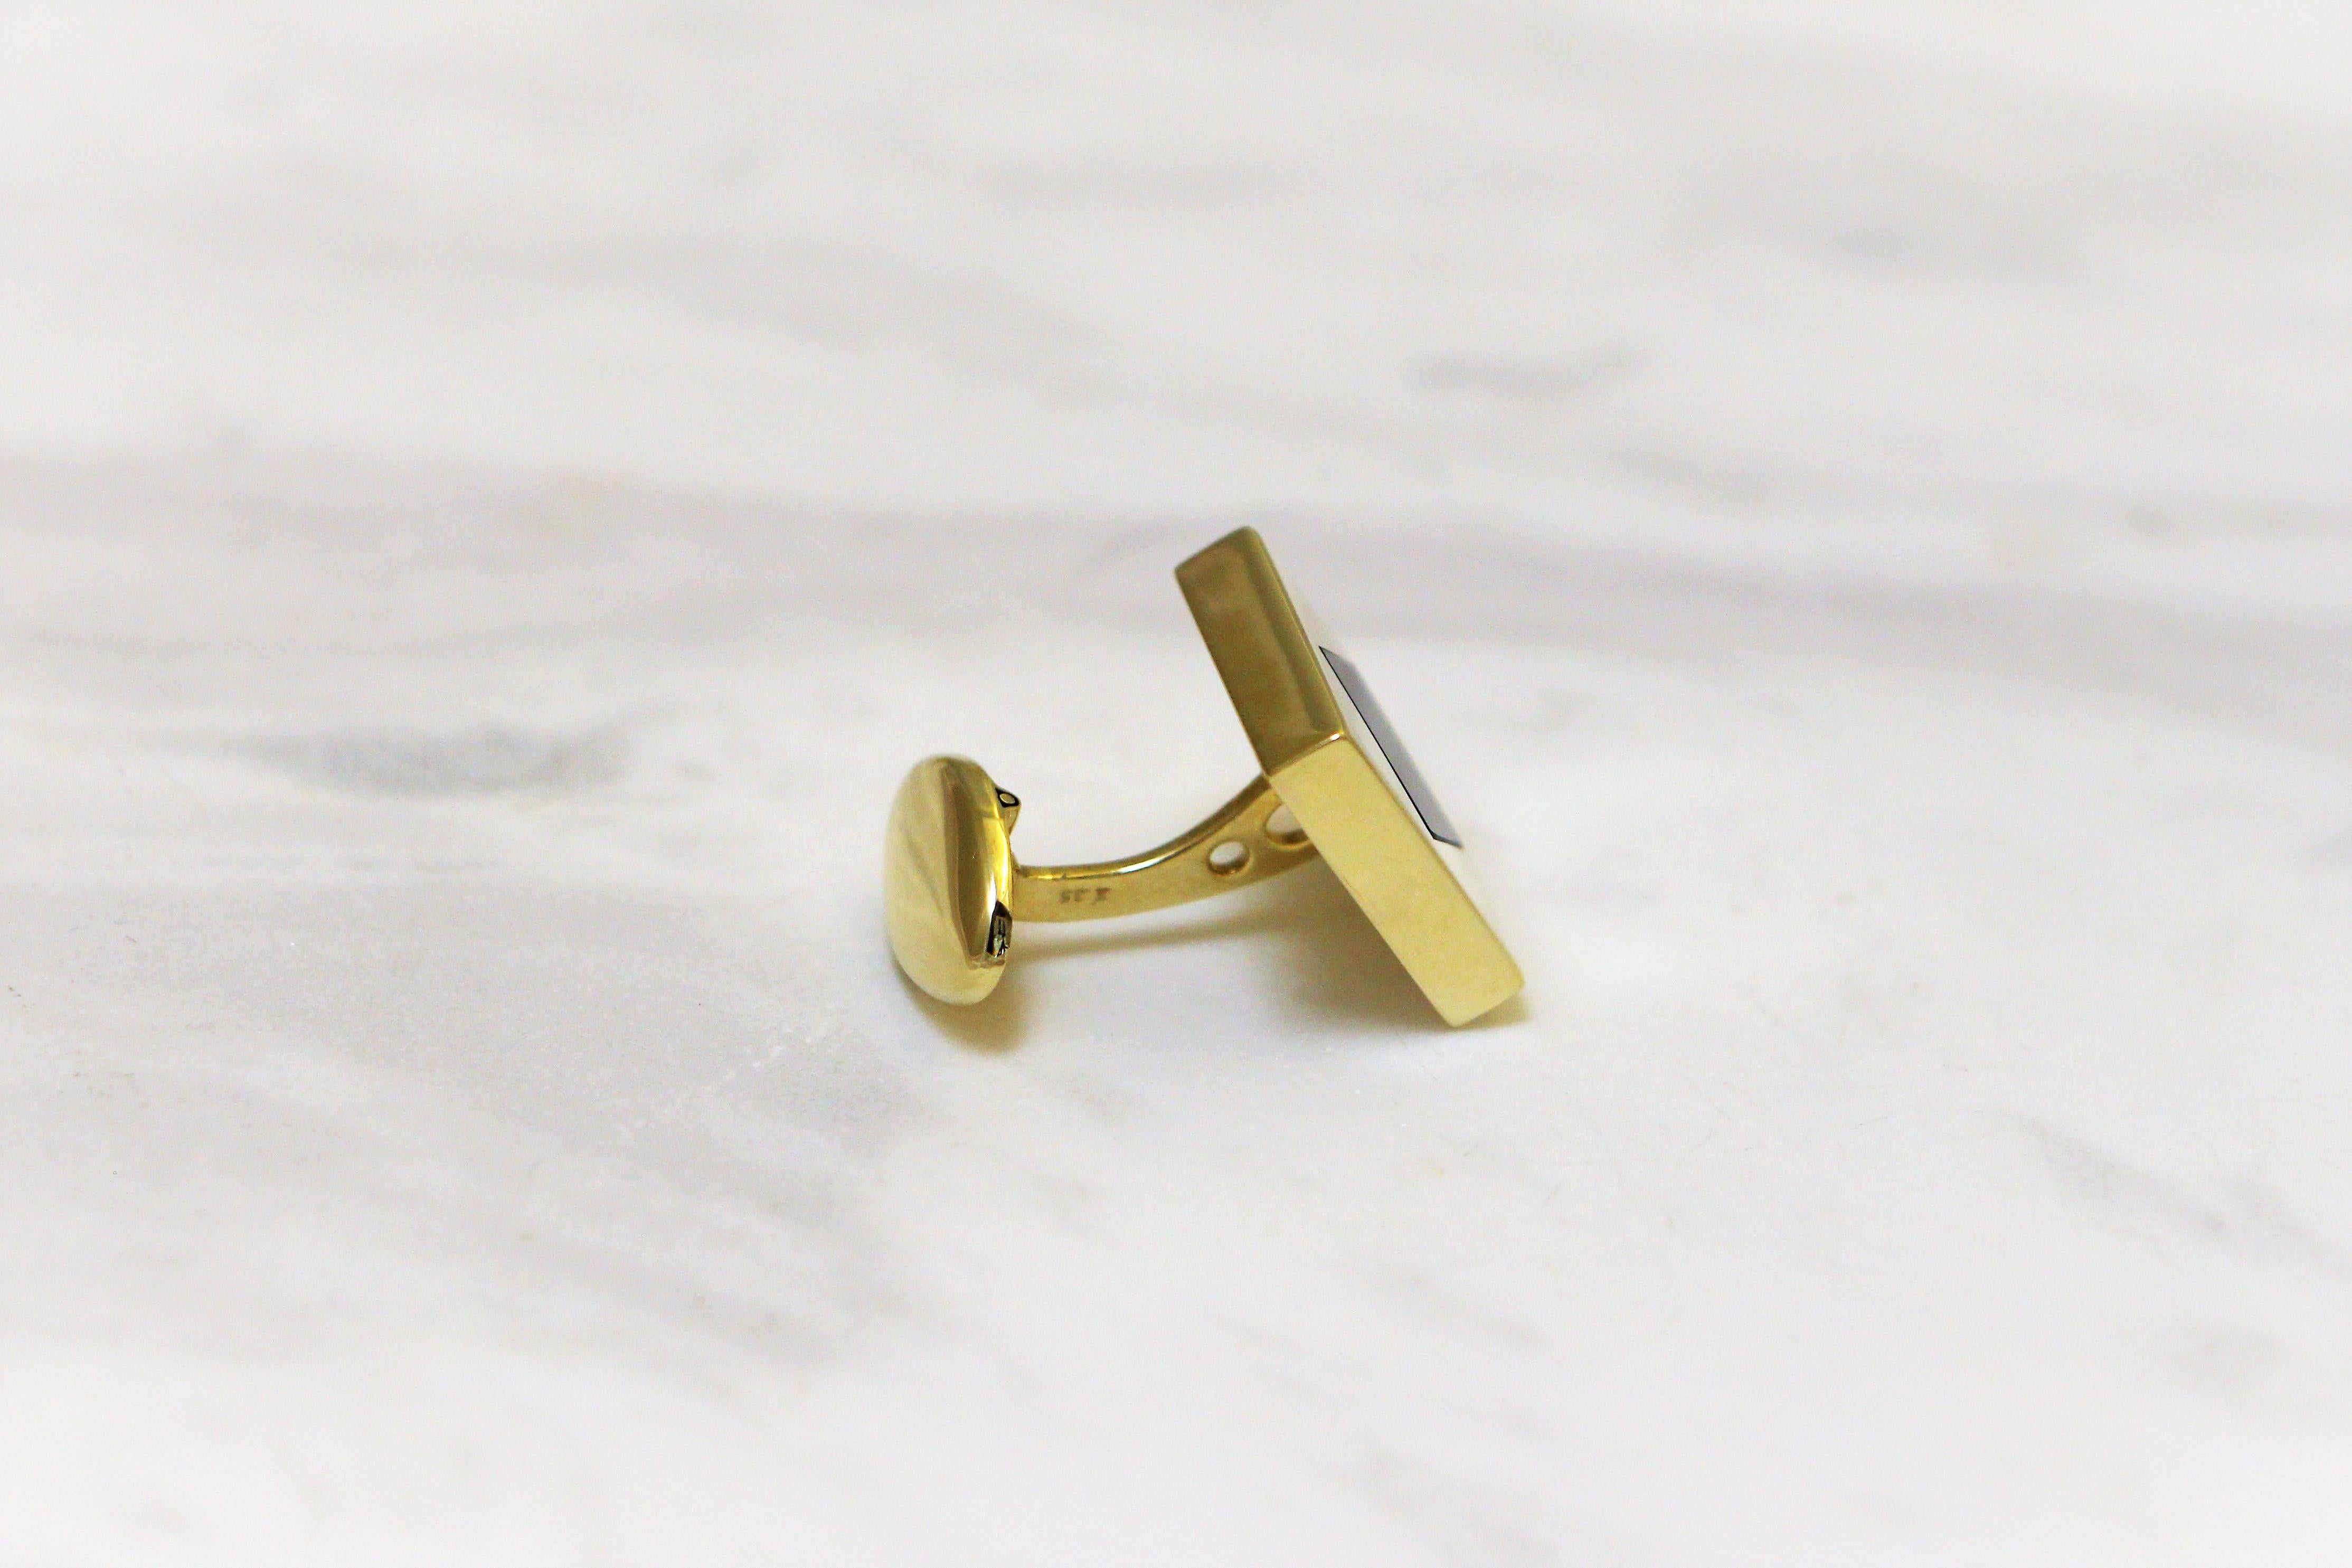 Square cufflinks handcrafted in 14Kt yellow gold featuring a rhombus black onyx centre. The black and gold colour combination captures the eternal spirit of fashion with timeless sophistication. These cufflinks belong to Metalloplasies Collection: